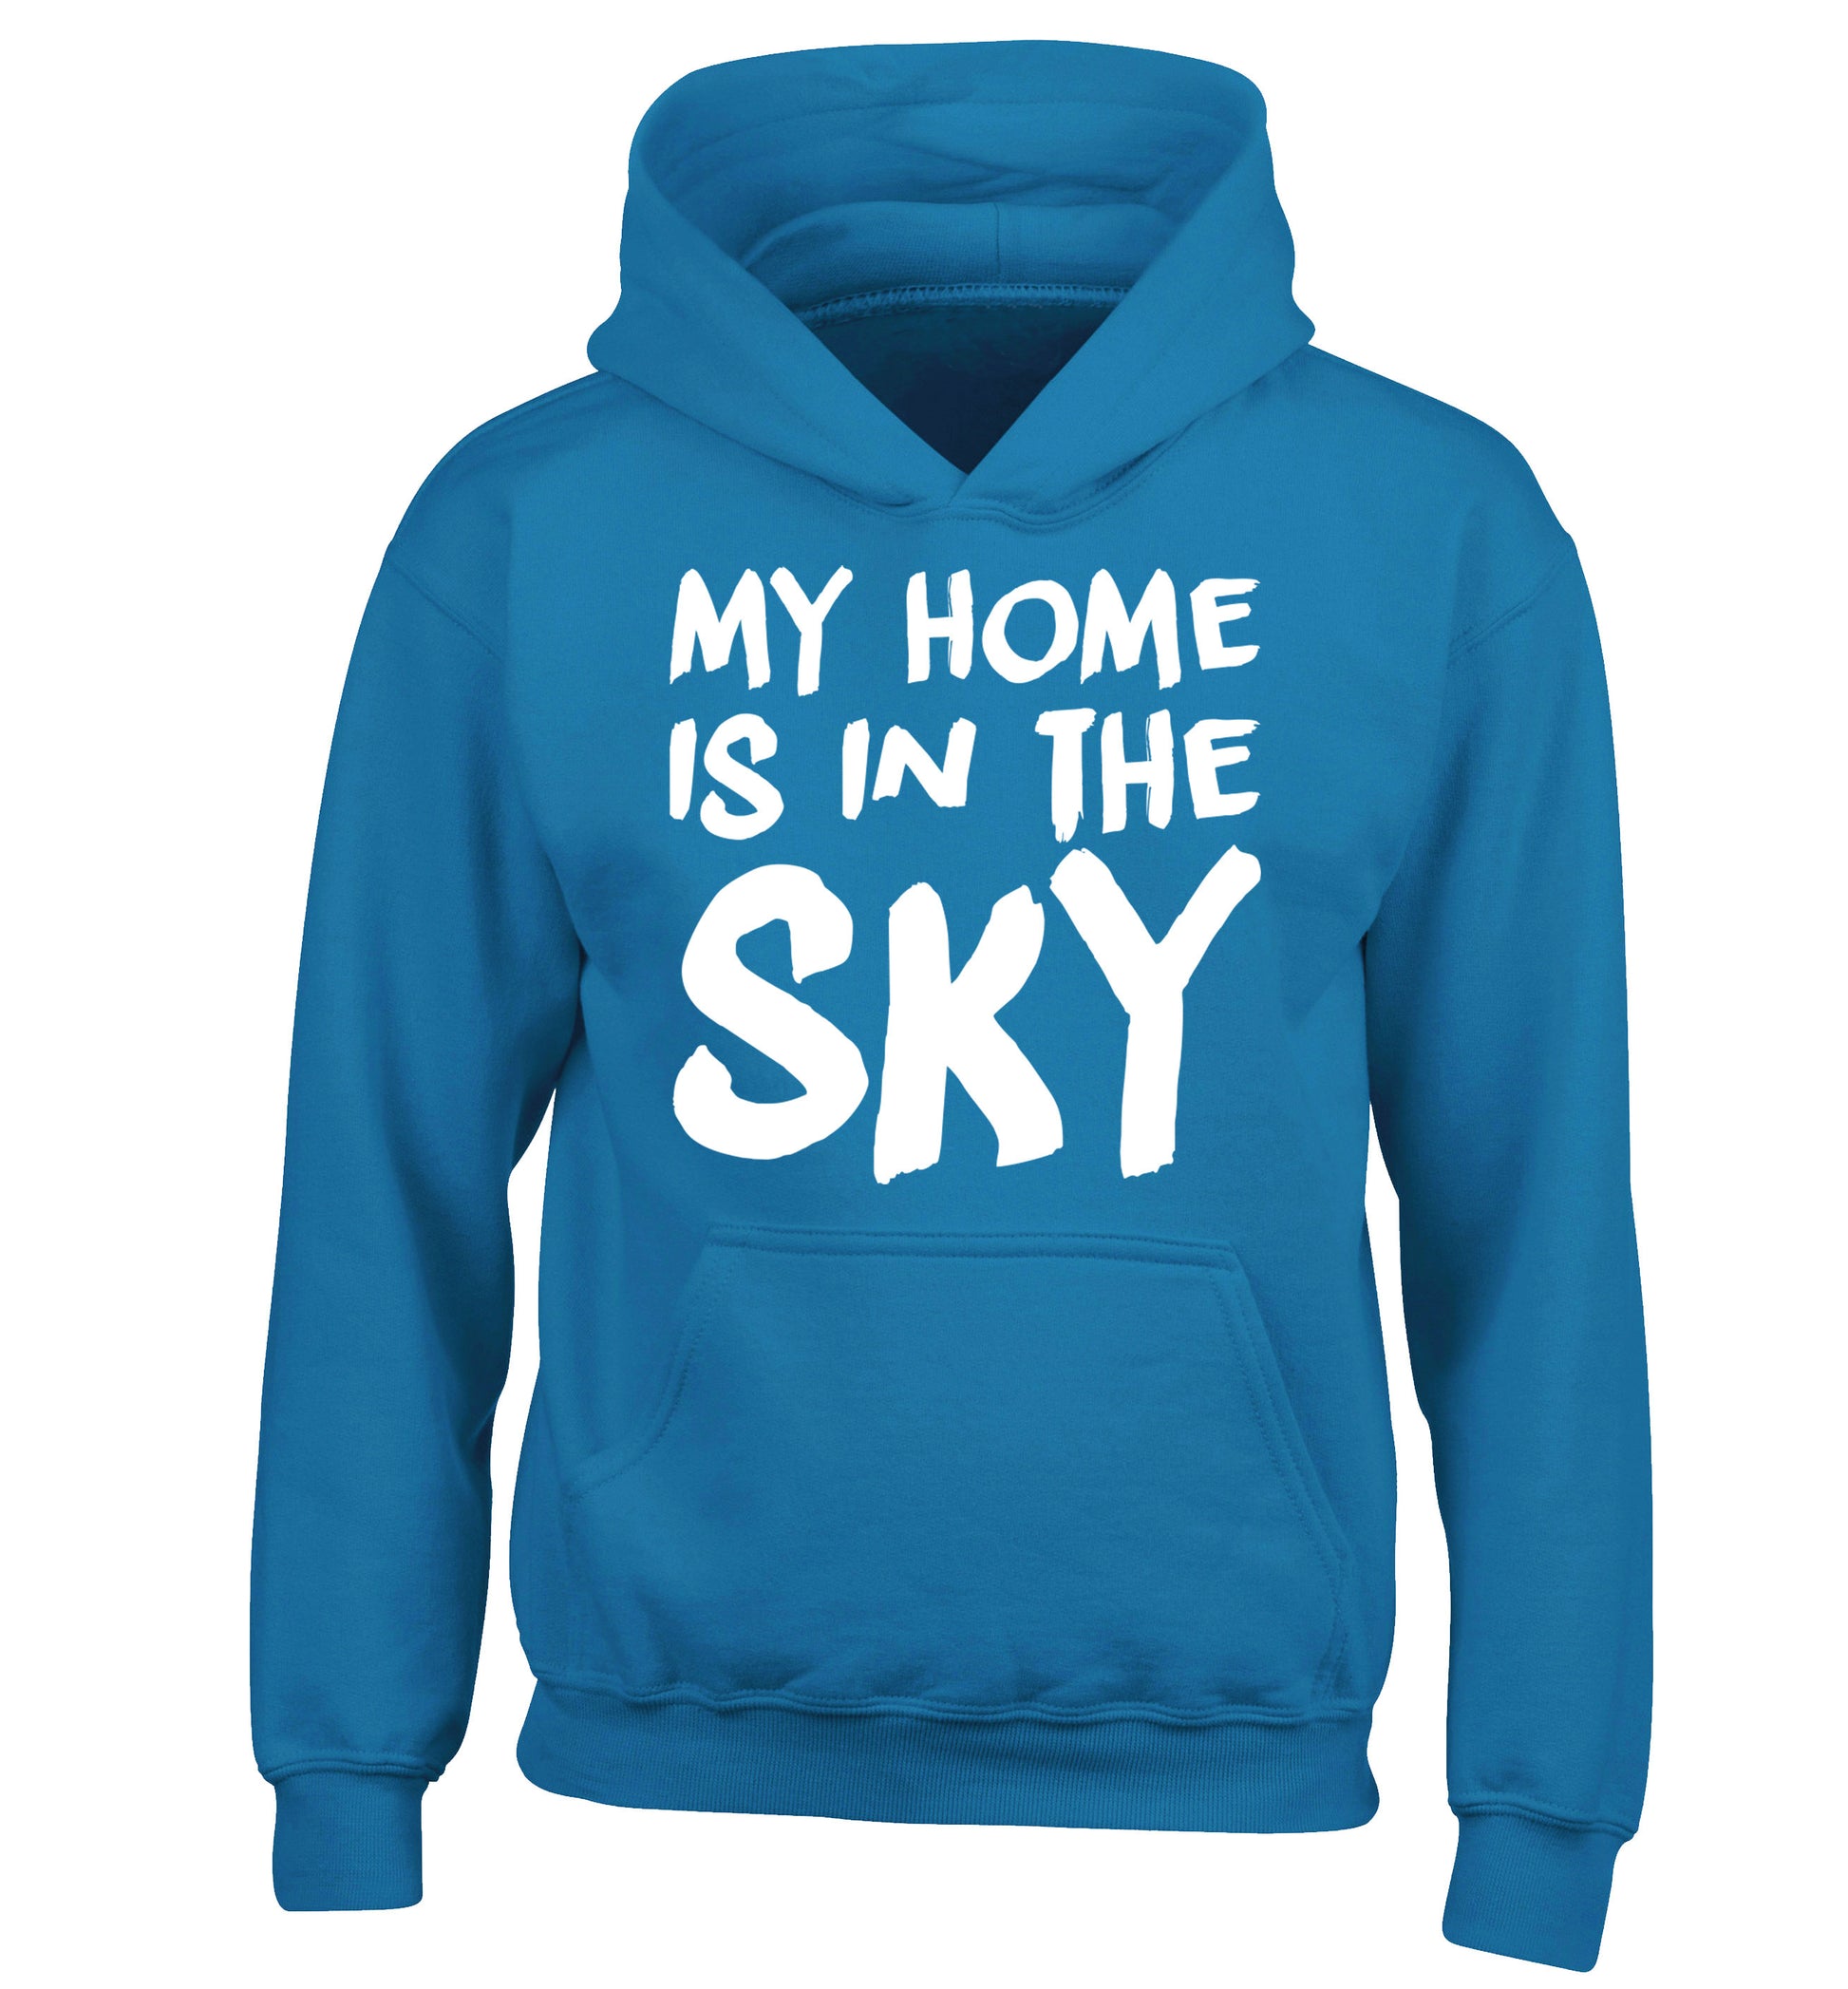 My home is in the sky children's blue hoodie 12-14 Years